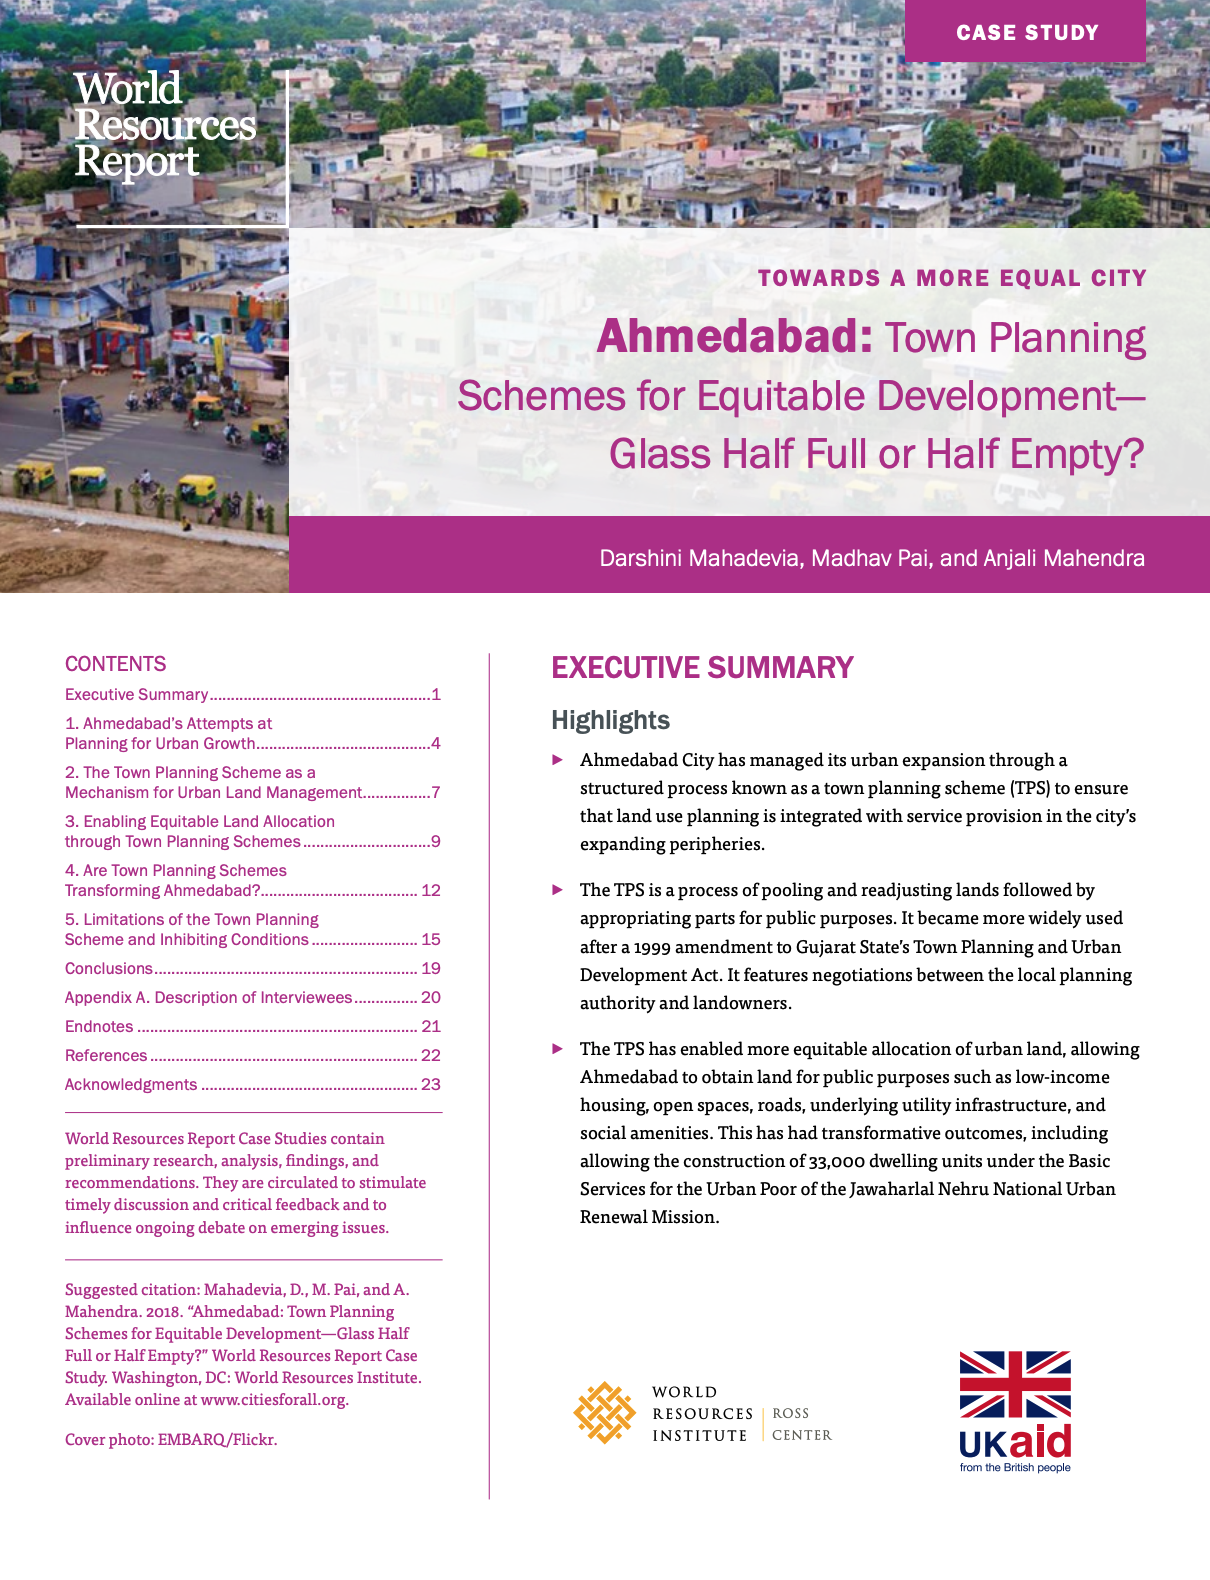 Ahmedabad: Town Planning Schemes for Equitable Development — Glass Half Full or Half Empty? cover image